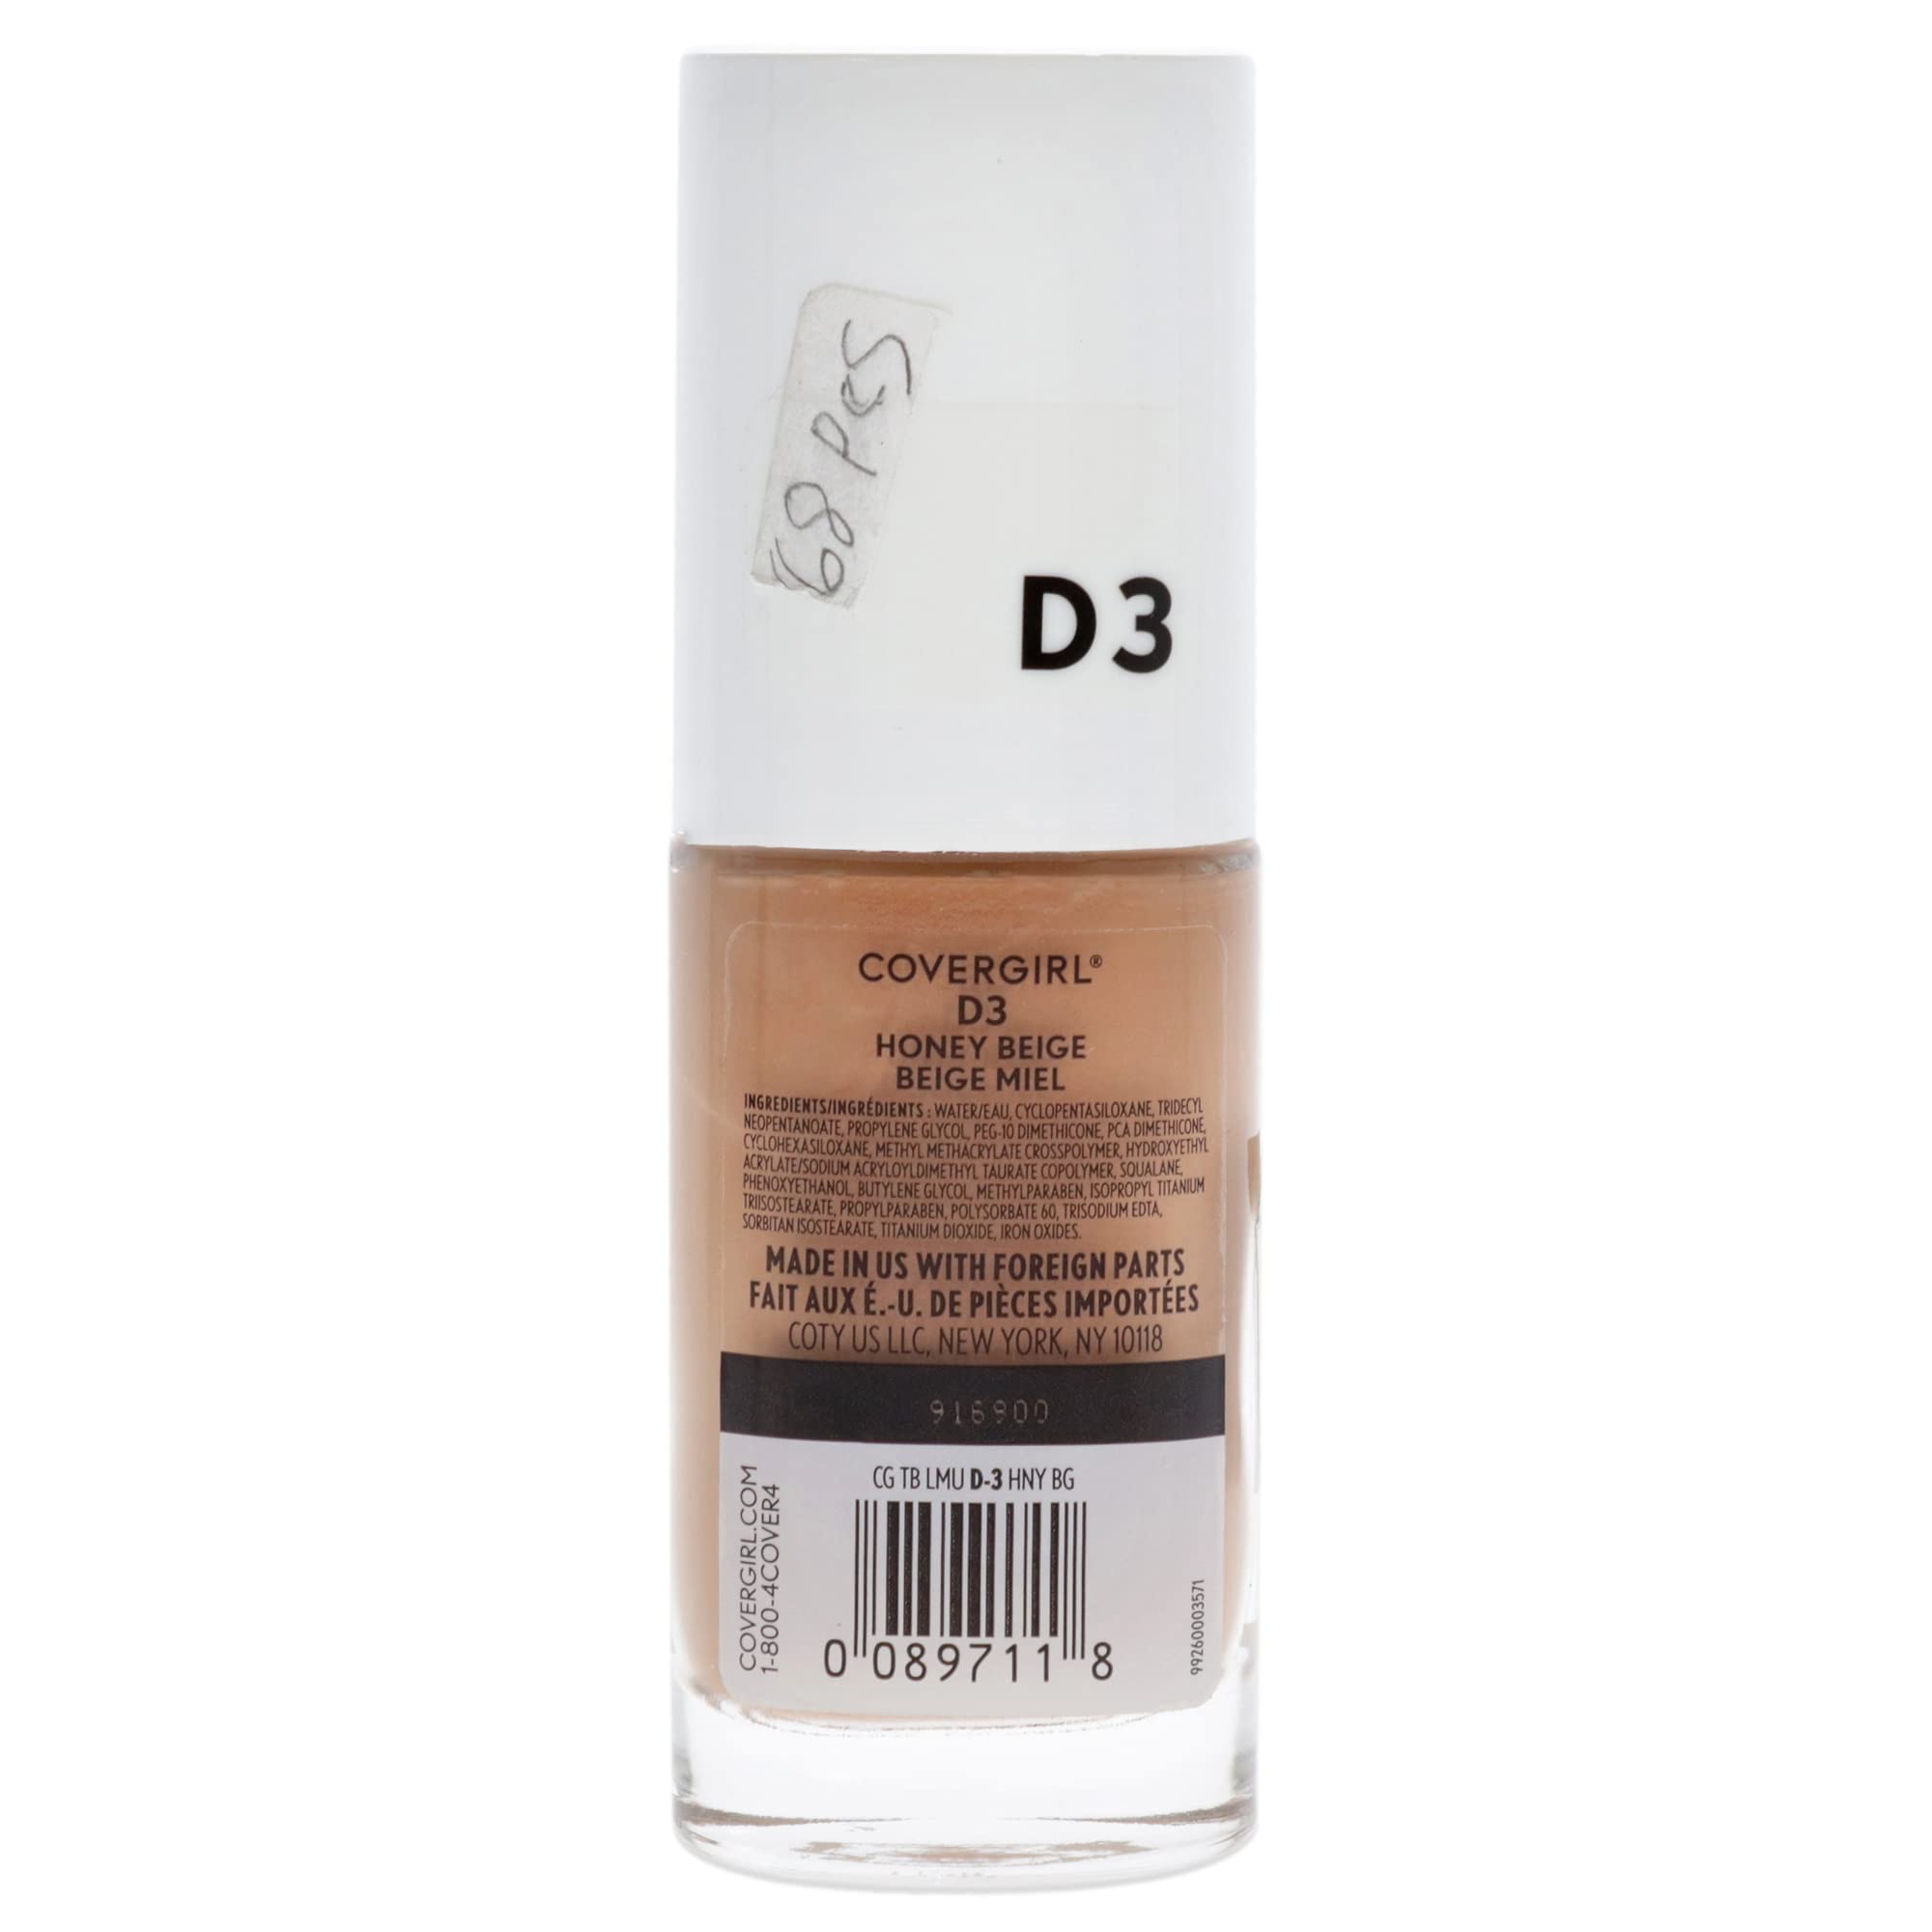 COVERGIRL truBlend Liquid Foundation Makeup Honey Beige D3, 1 oz (packaging may vary)